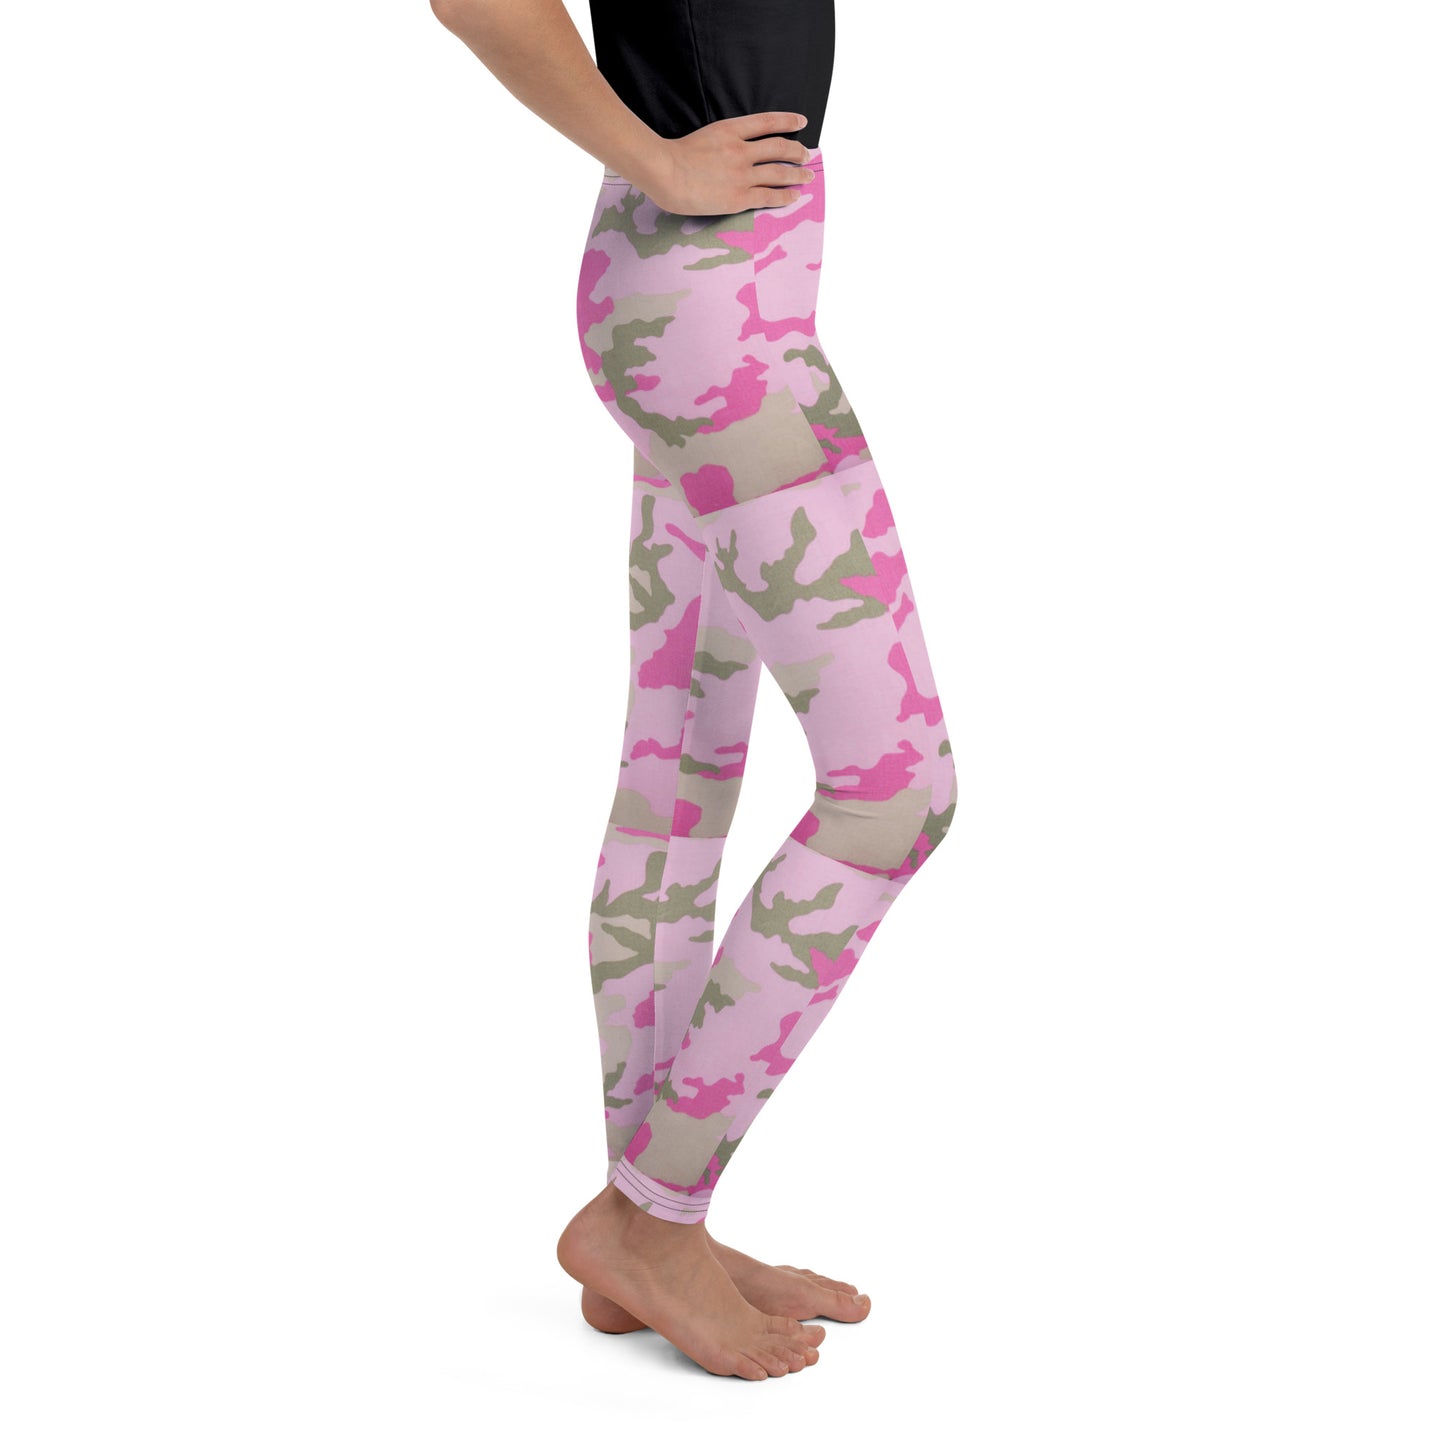 Youth Leggings - Pink Green Camouflage